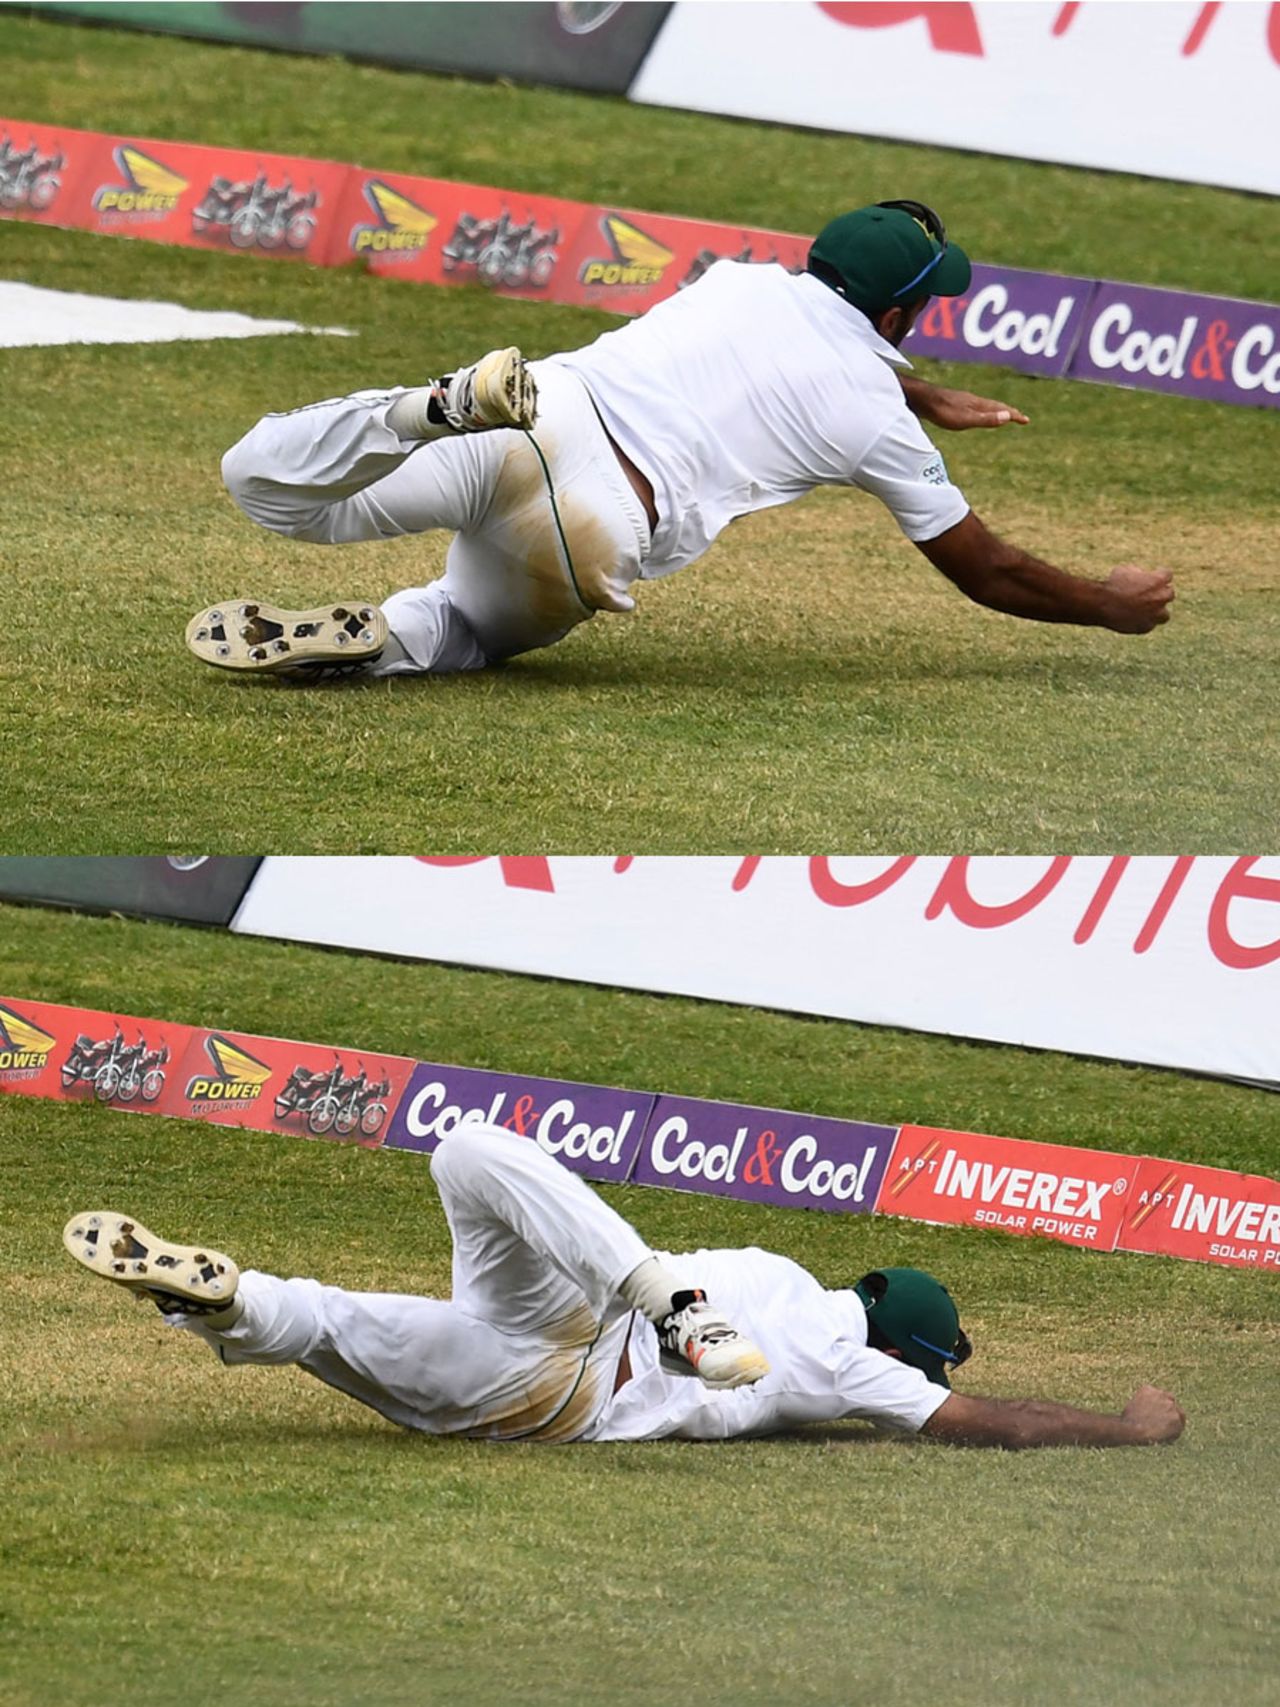 Wahab Riaz took a stunning catch to remove Roston Chase, West Indies v Pakistan, 1st Test, Jamaica, 1st day, April 21, 2017